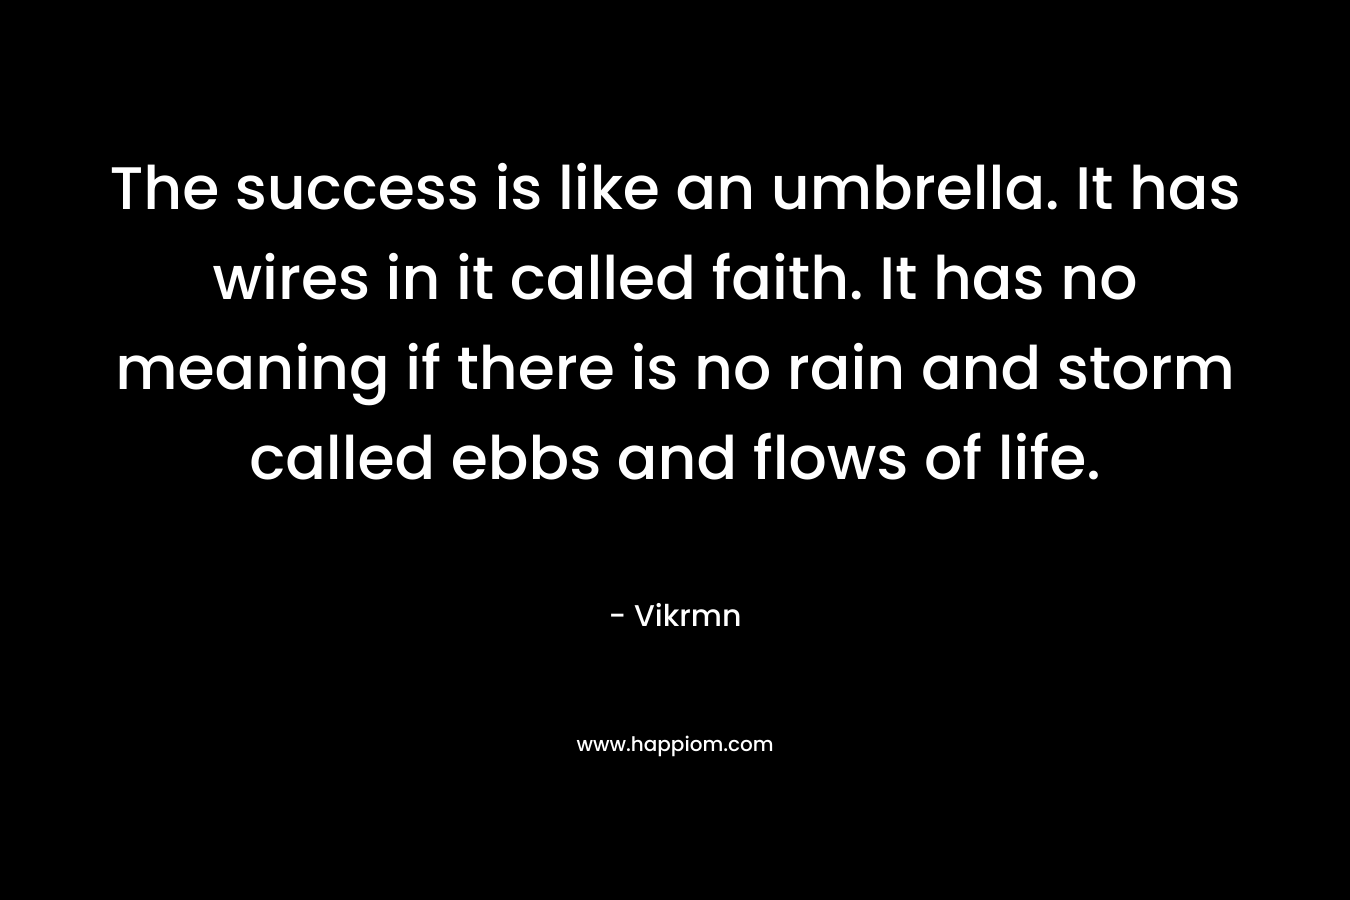 The success is like an umbrella. It has wires in it called faith. It has no meaning if there is no rain and storm called ebbs and flows of life.